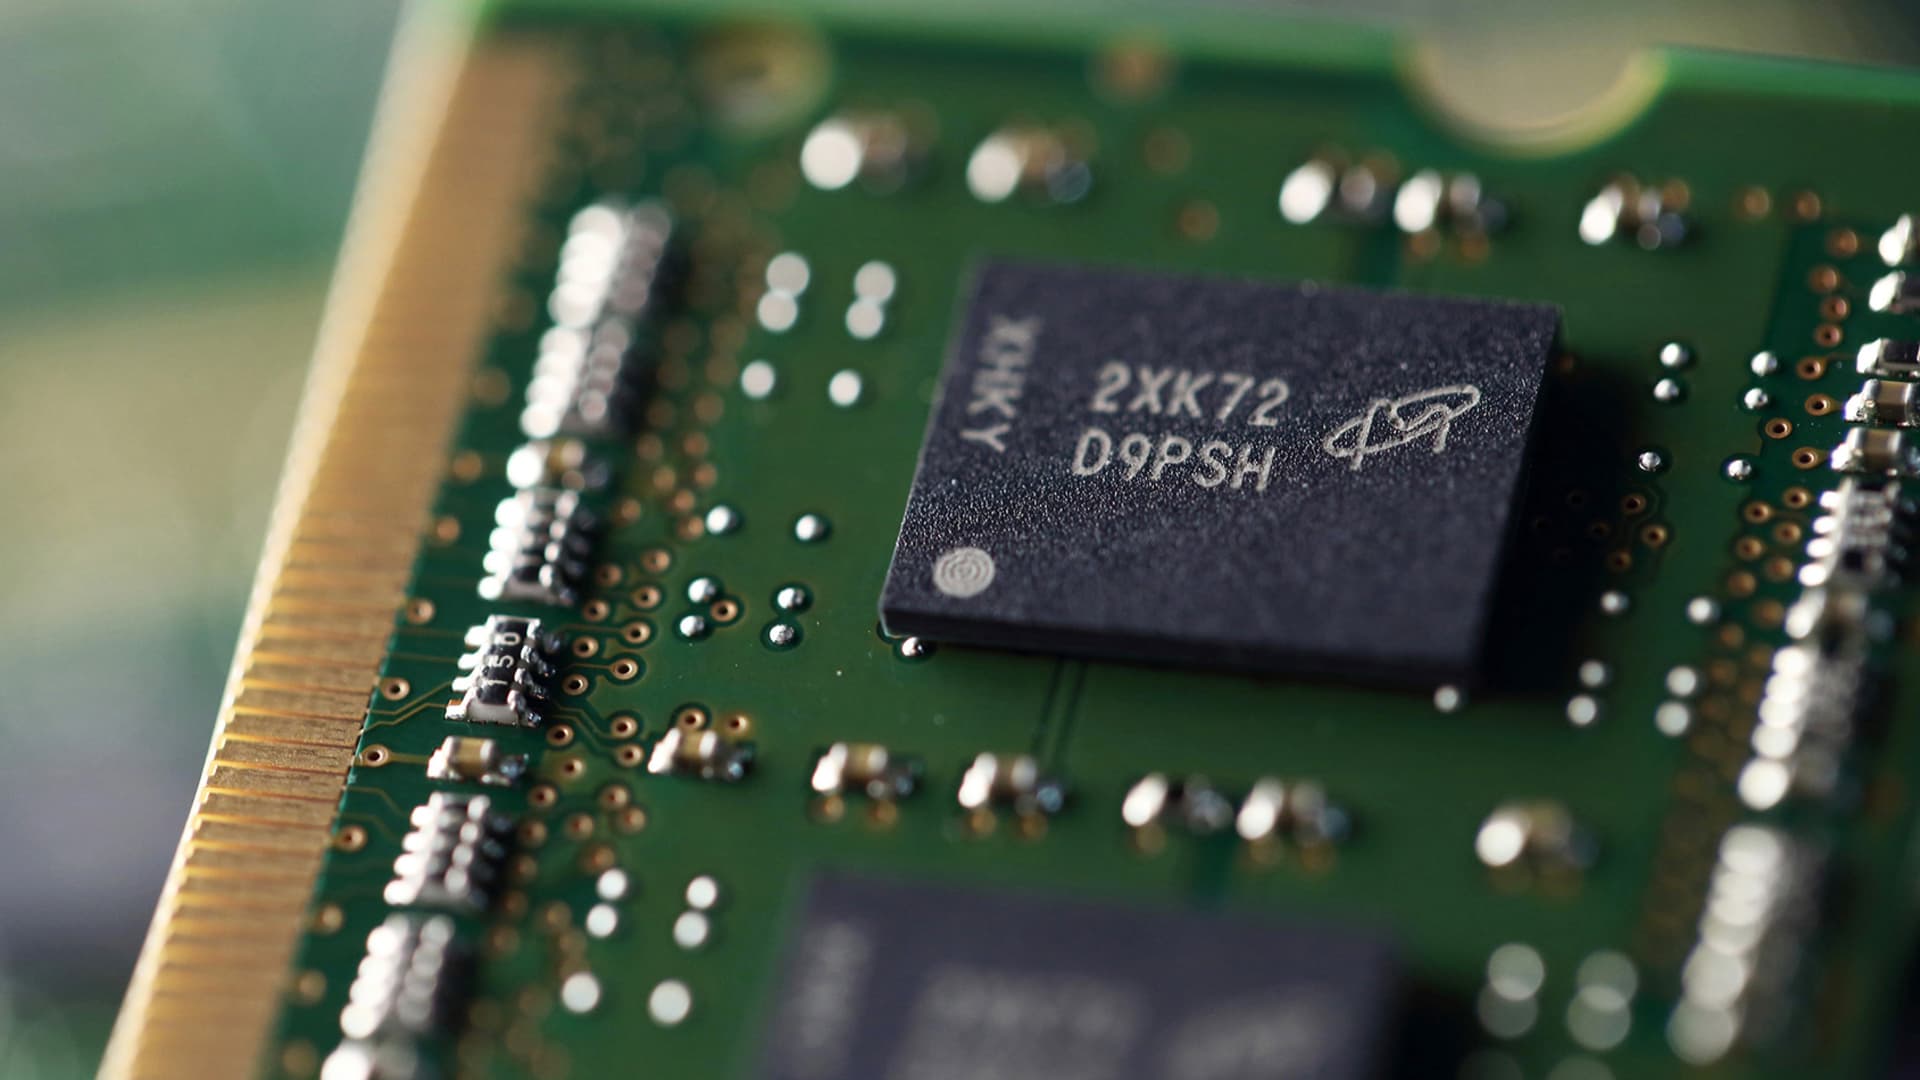 China chip stocks rally after Beijing said U.S. chip giant Micron is ‘main security threat’